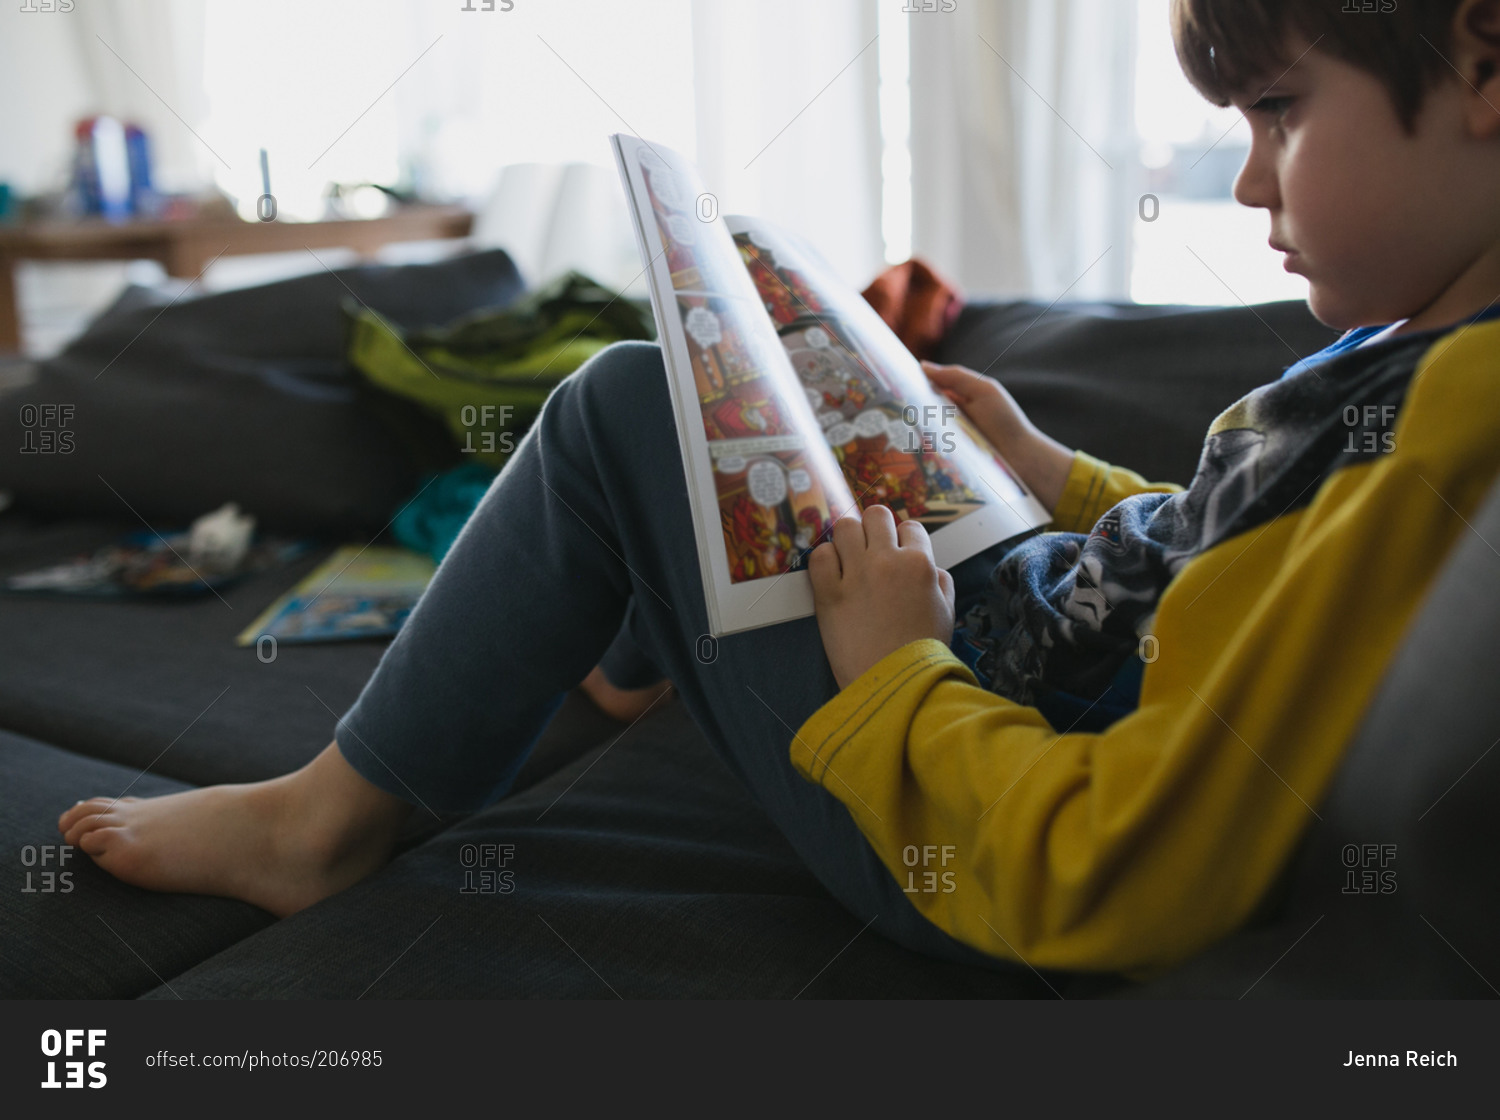 Young boy reading a graphic novel on a couch